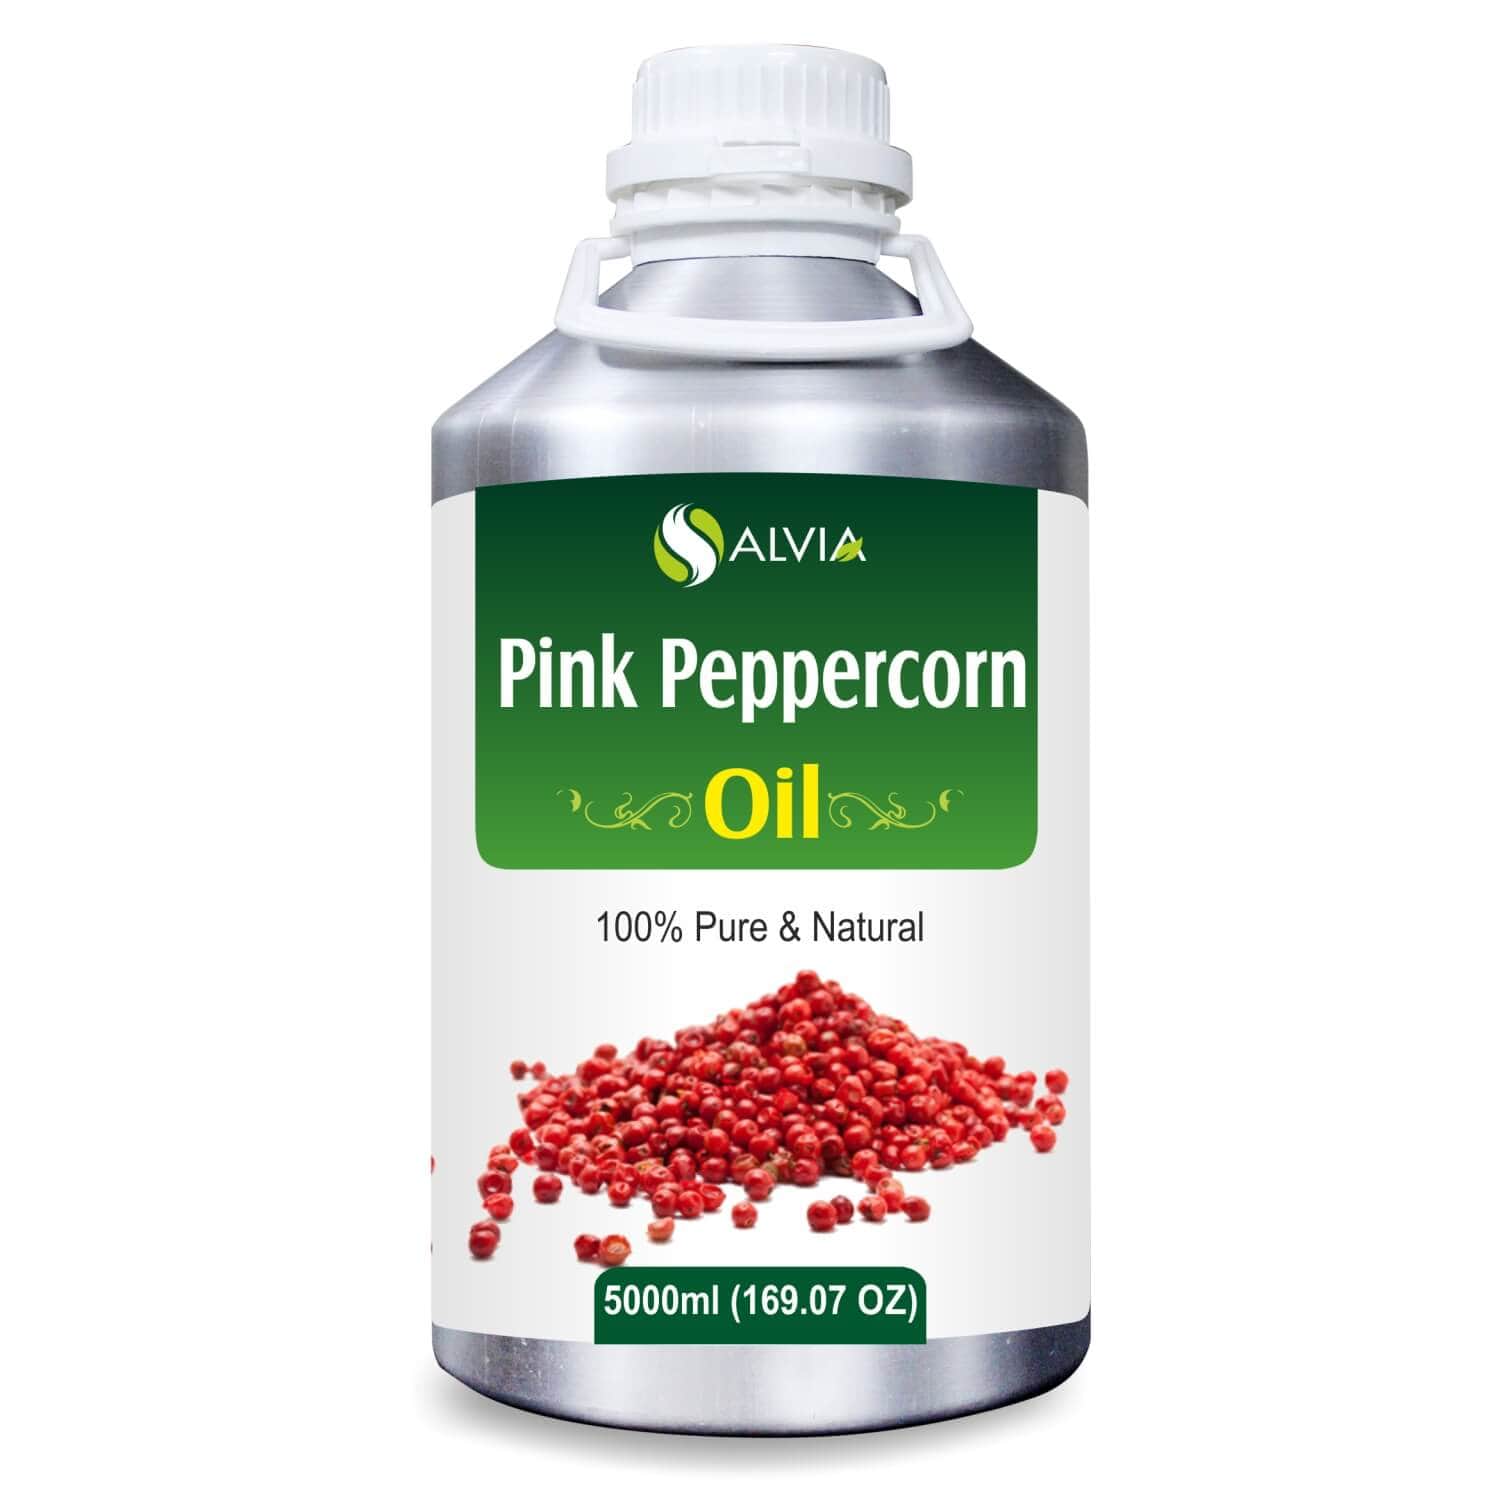 shoprythmindia Natural Essential Oils 5000ml Pink Peppercorn Oil (Schinus-Molle) 100% Natural Pure Essential Oil Antioxidants, Antibacterial, Cleanses The Skin, Natural Insect-Repellent, Aromatherapy